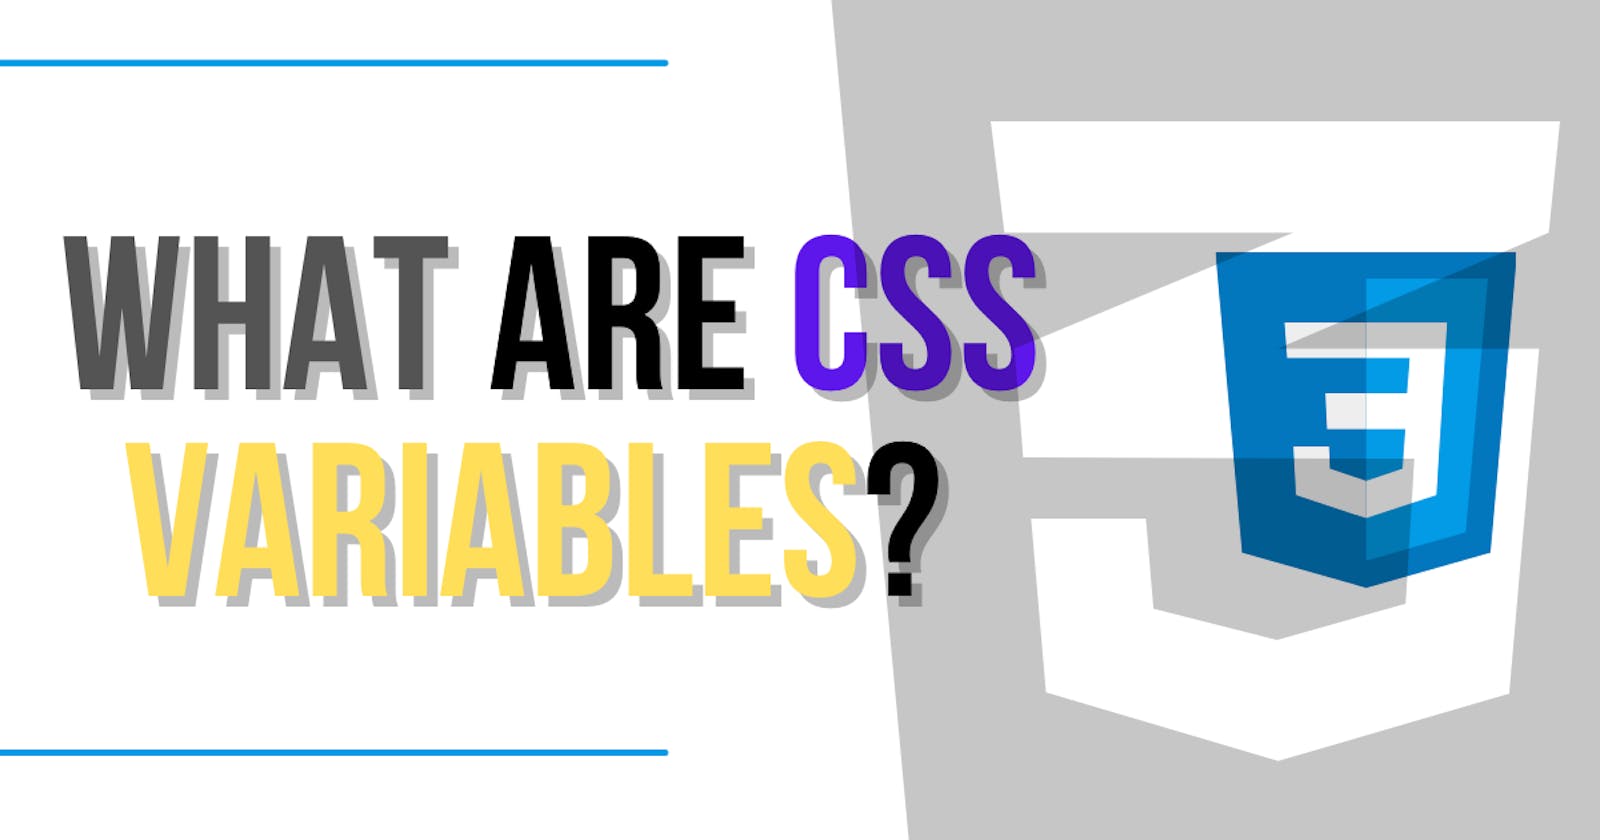 What are CSS Variables?